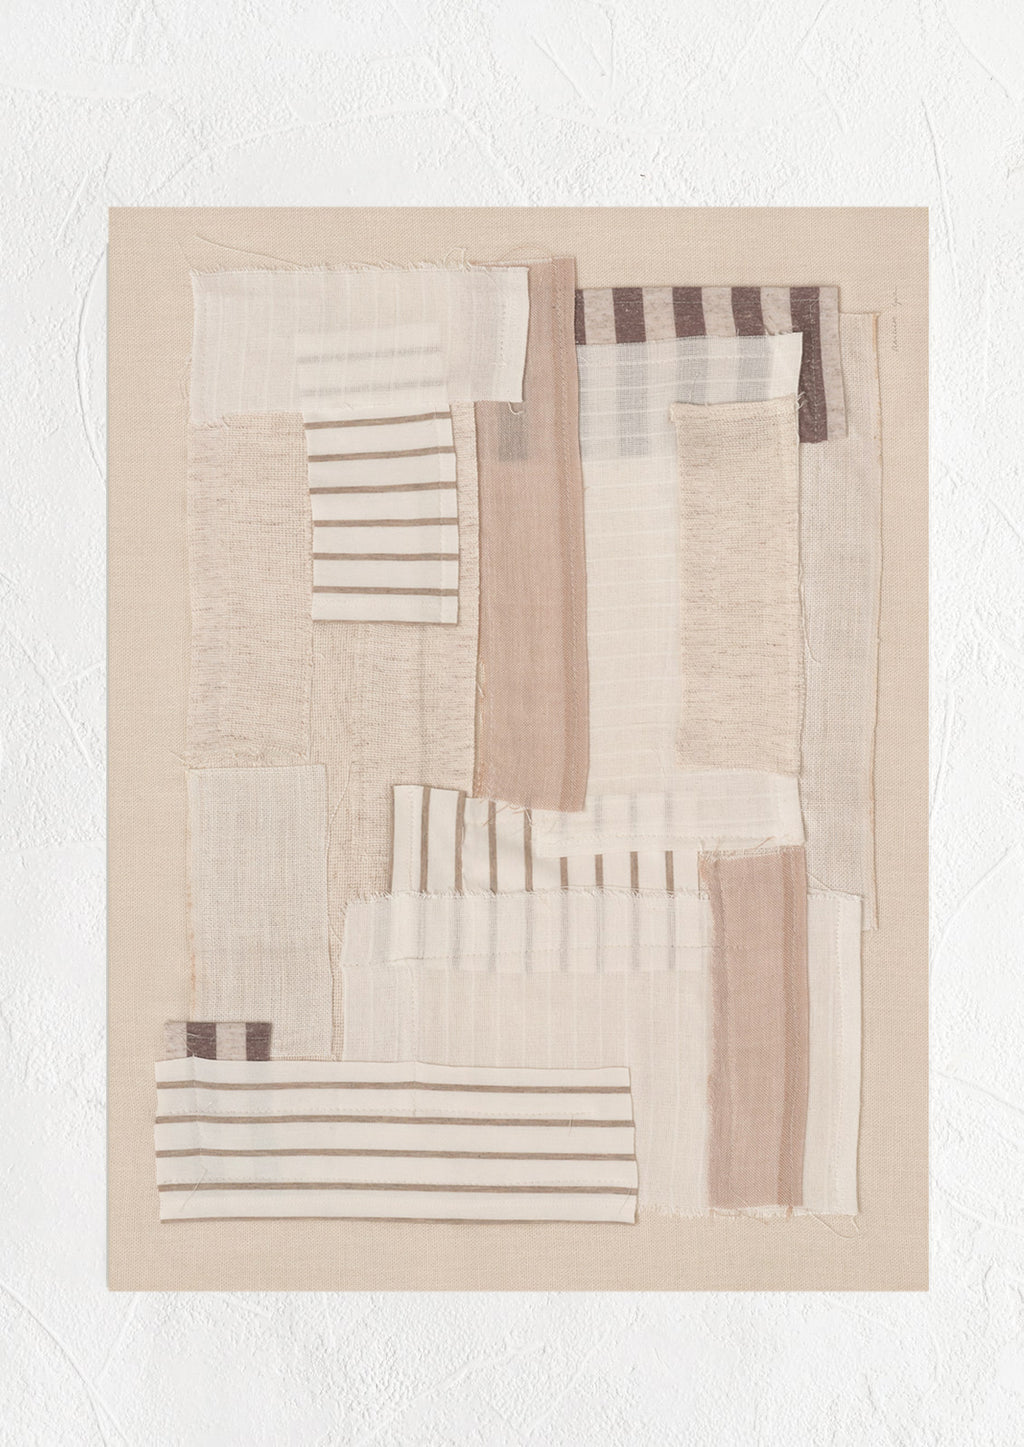 1: A photographic art print of layered beige fabric.